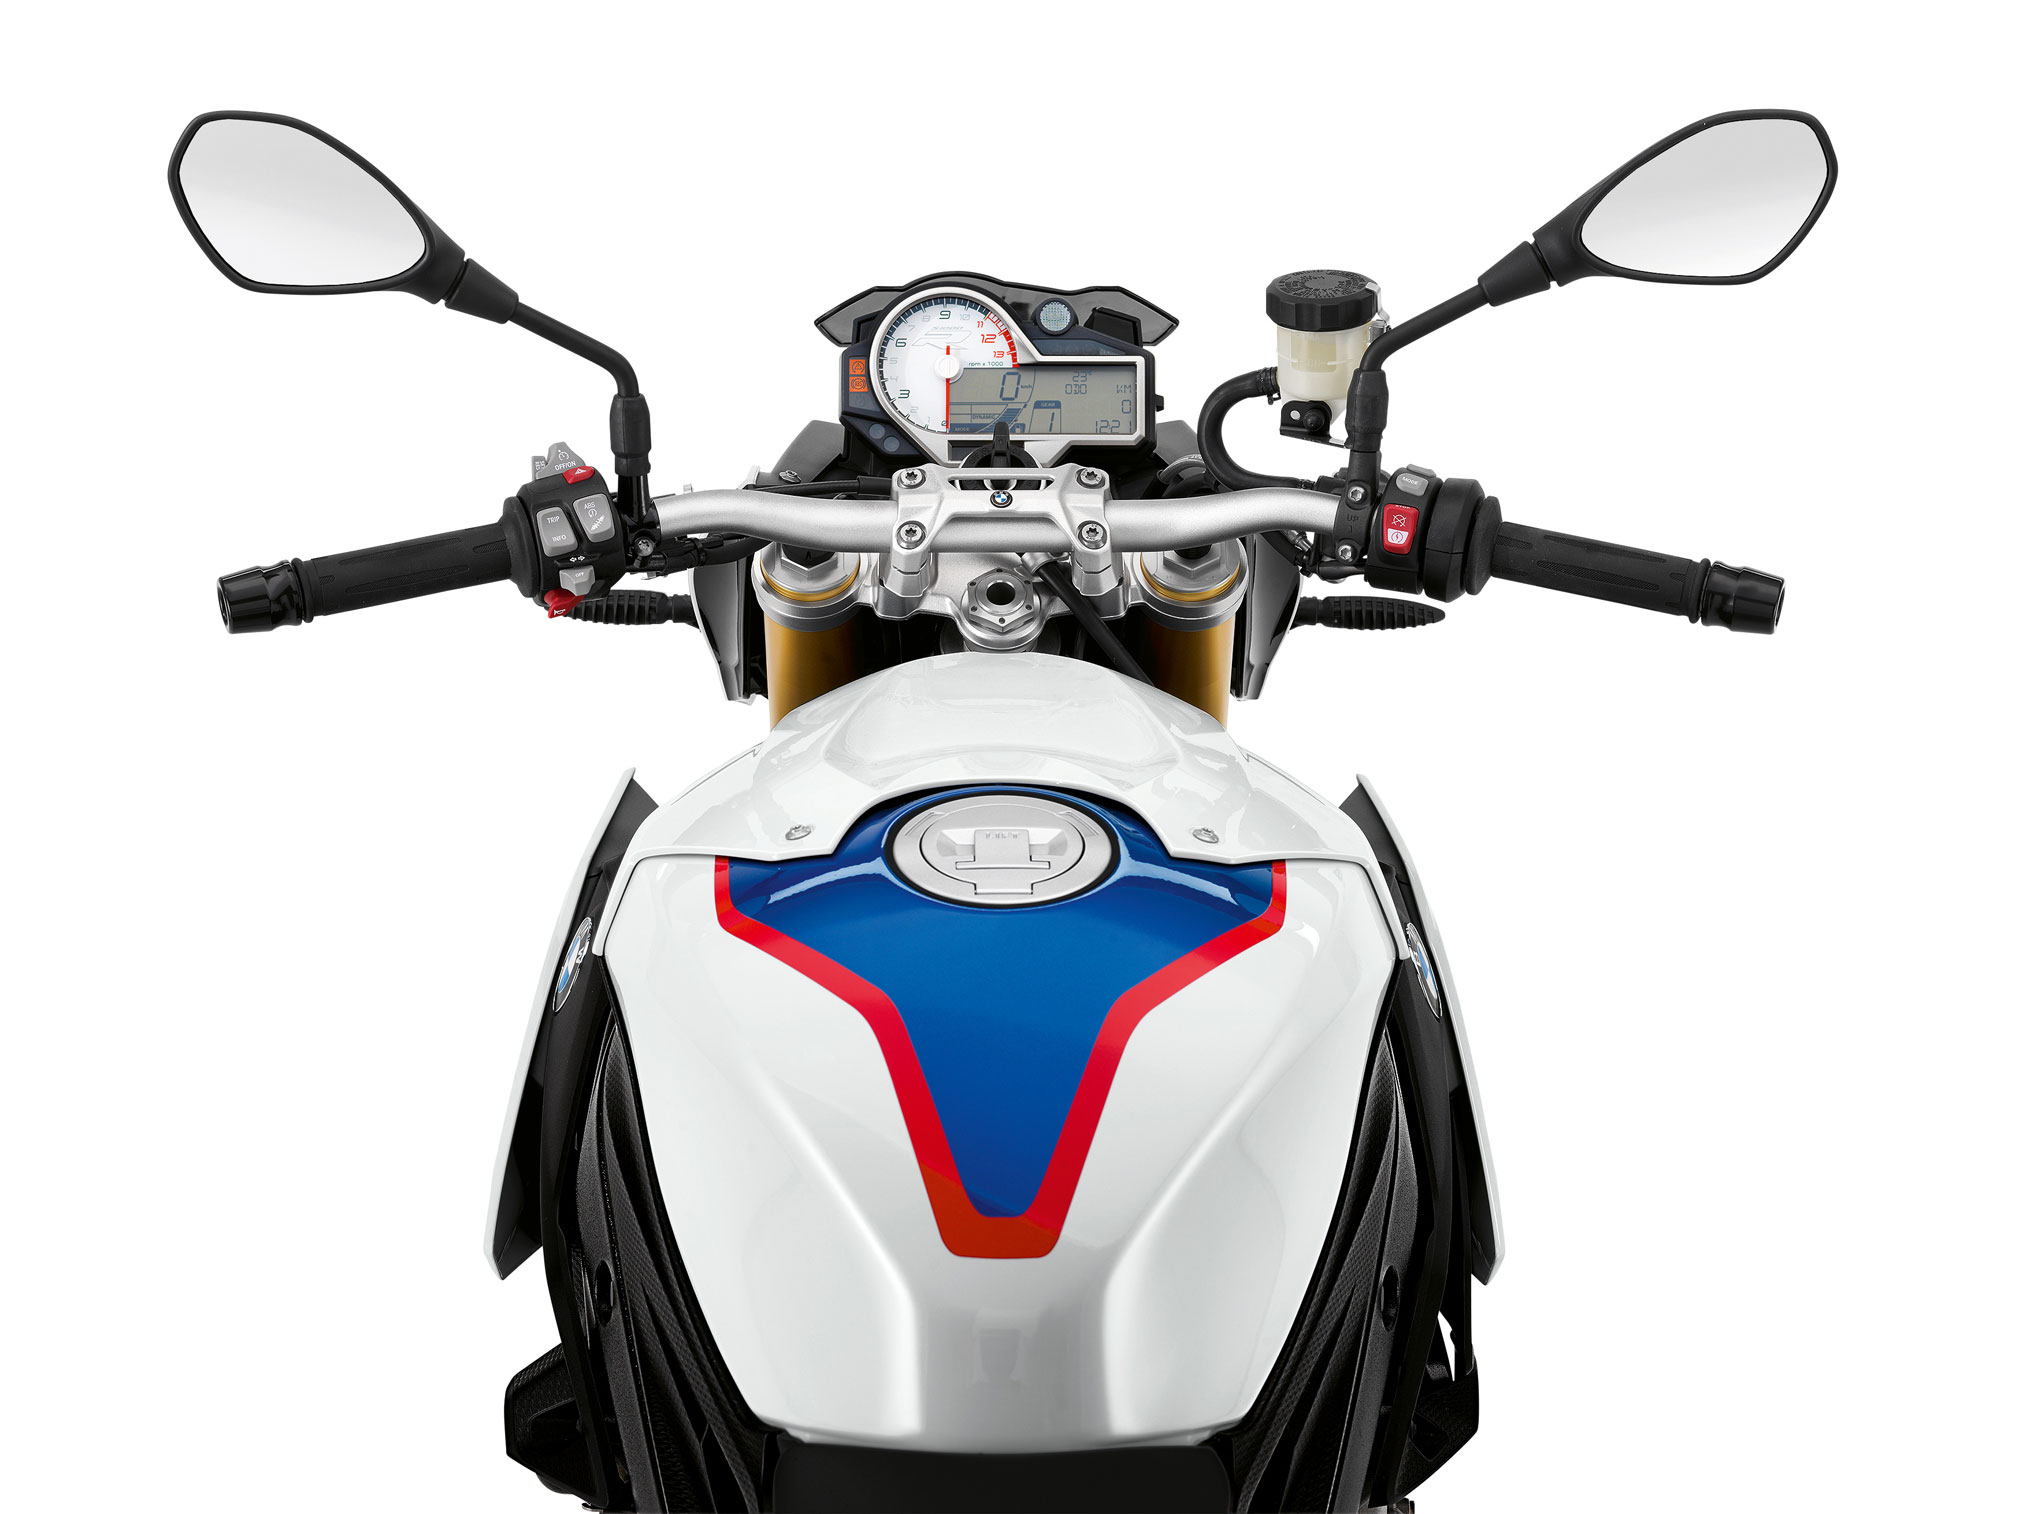 2019 BMW S1000R | Bobs BMW Motorcycles